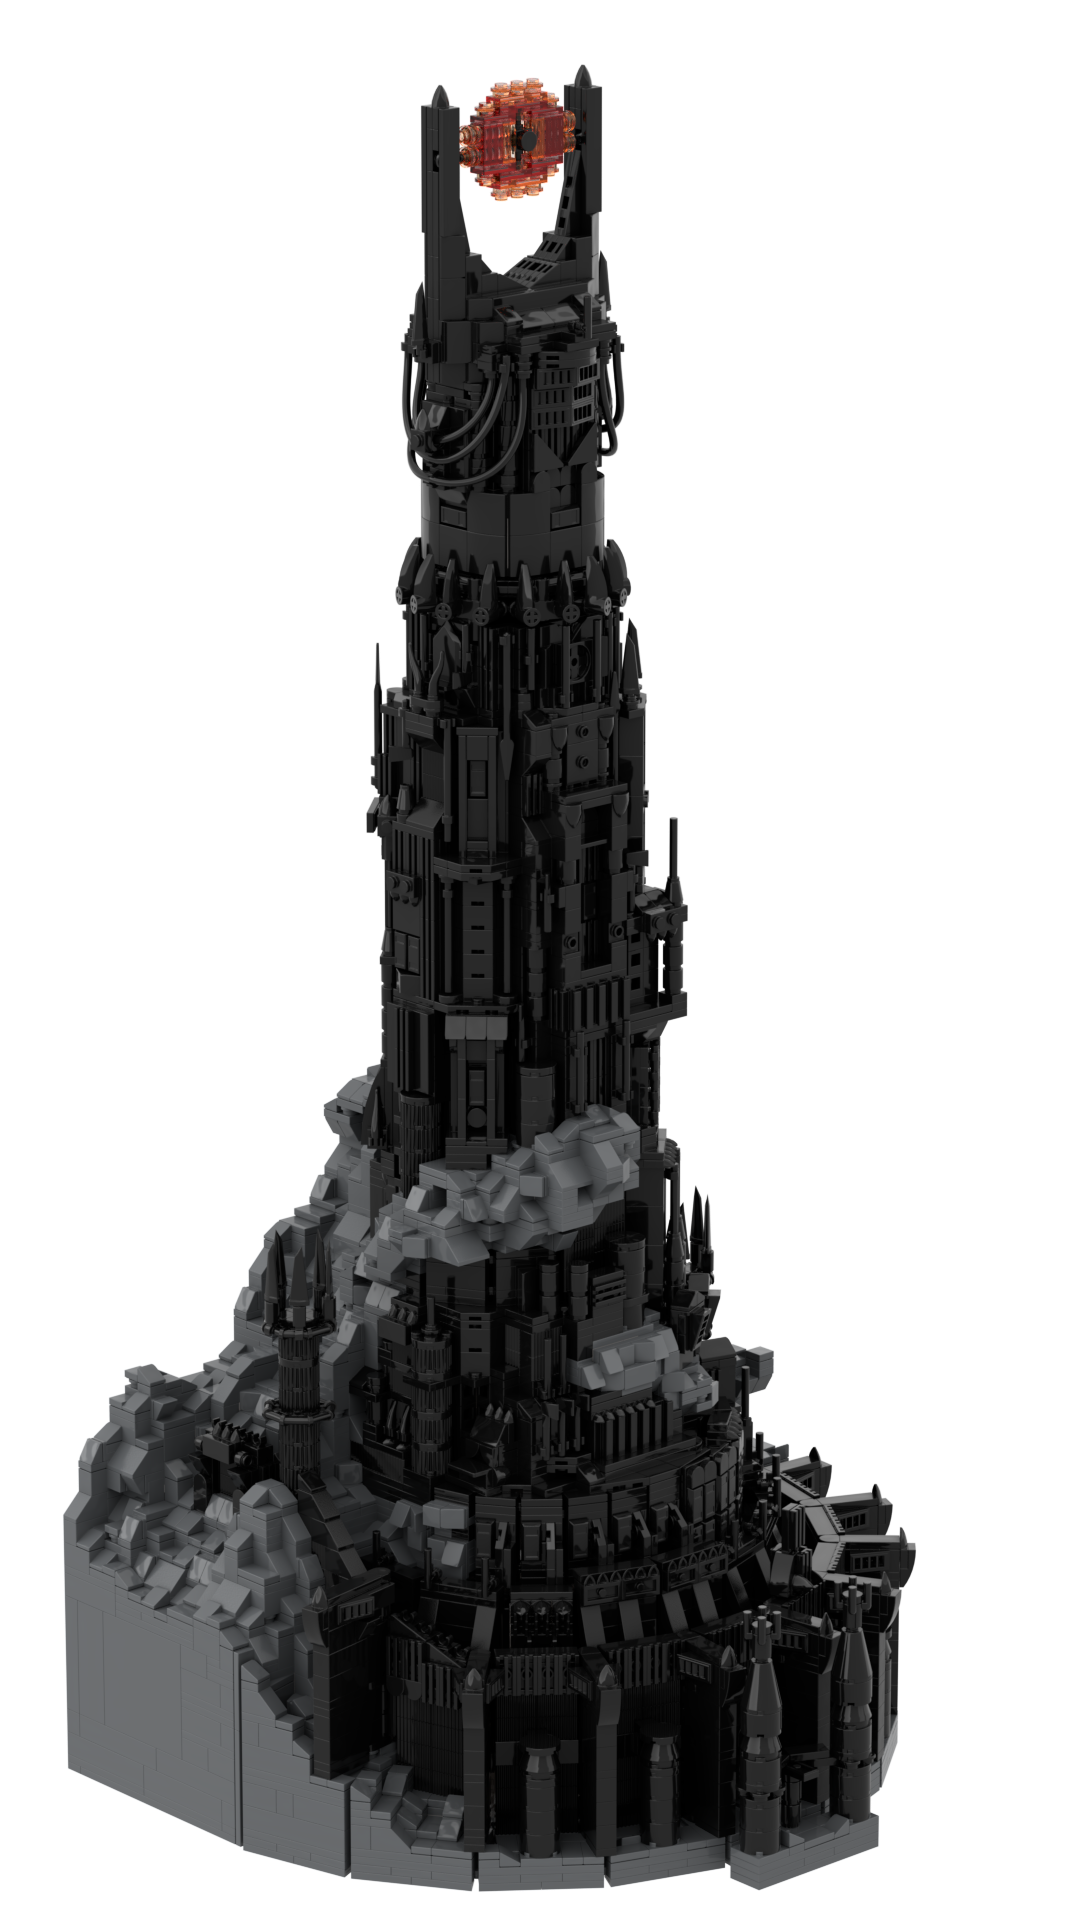 The Lord of the Rings Barad-dûr Dark Tower MOC-126262 Movie With 5996 Pieces